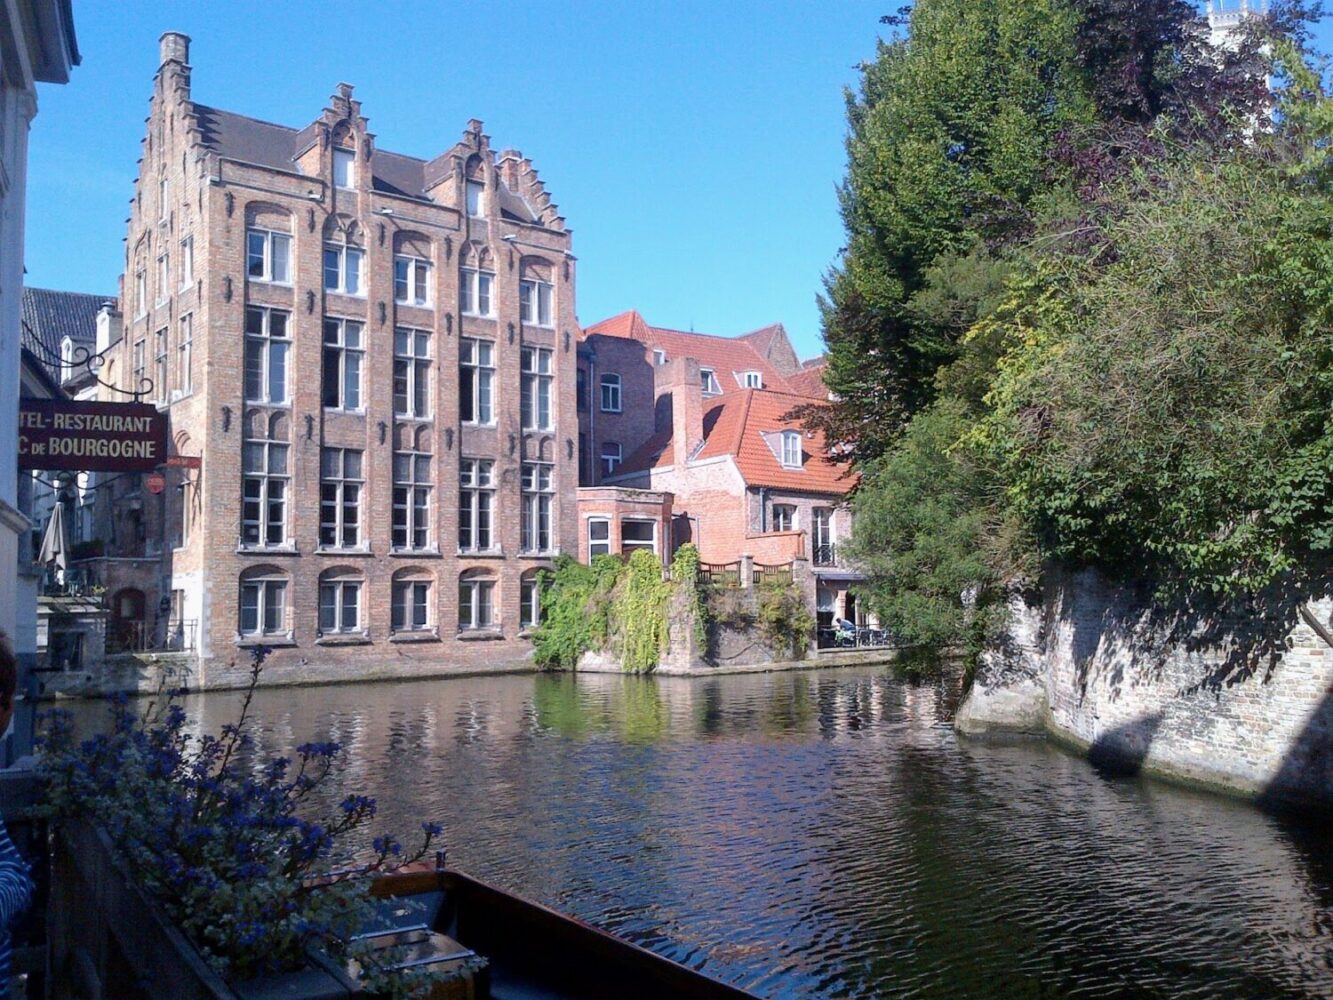 View of the amazing canal architecture from the water in Bruges, Belgian